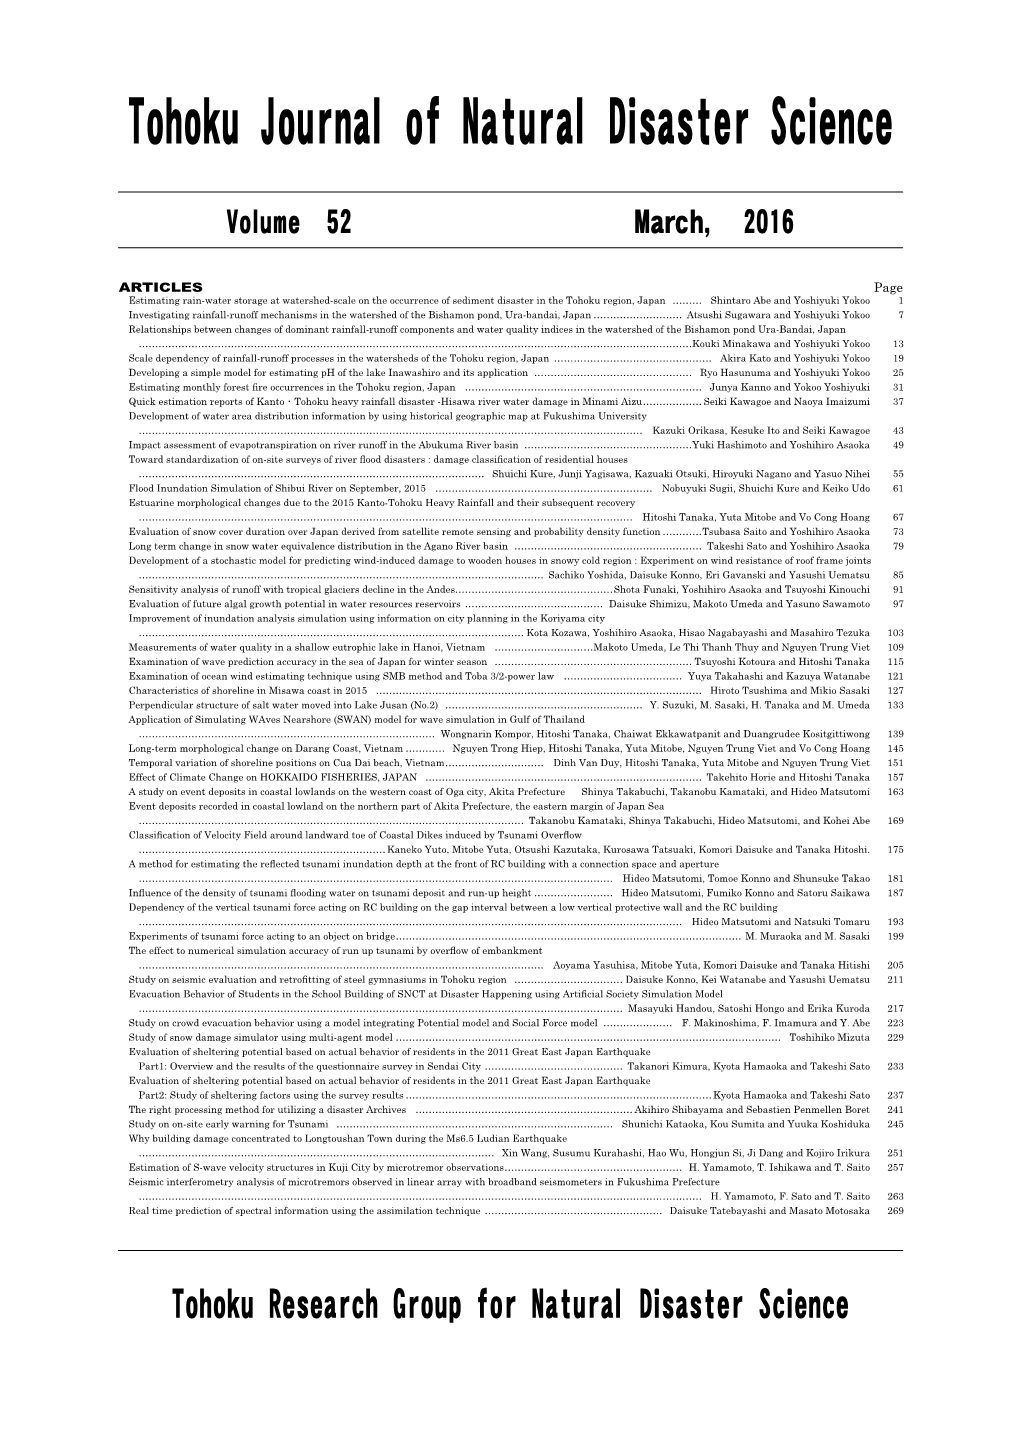 ARTICLES Page